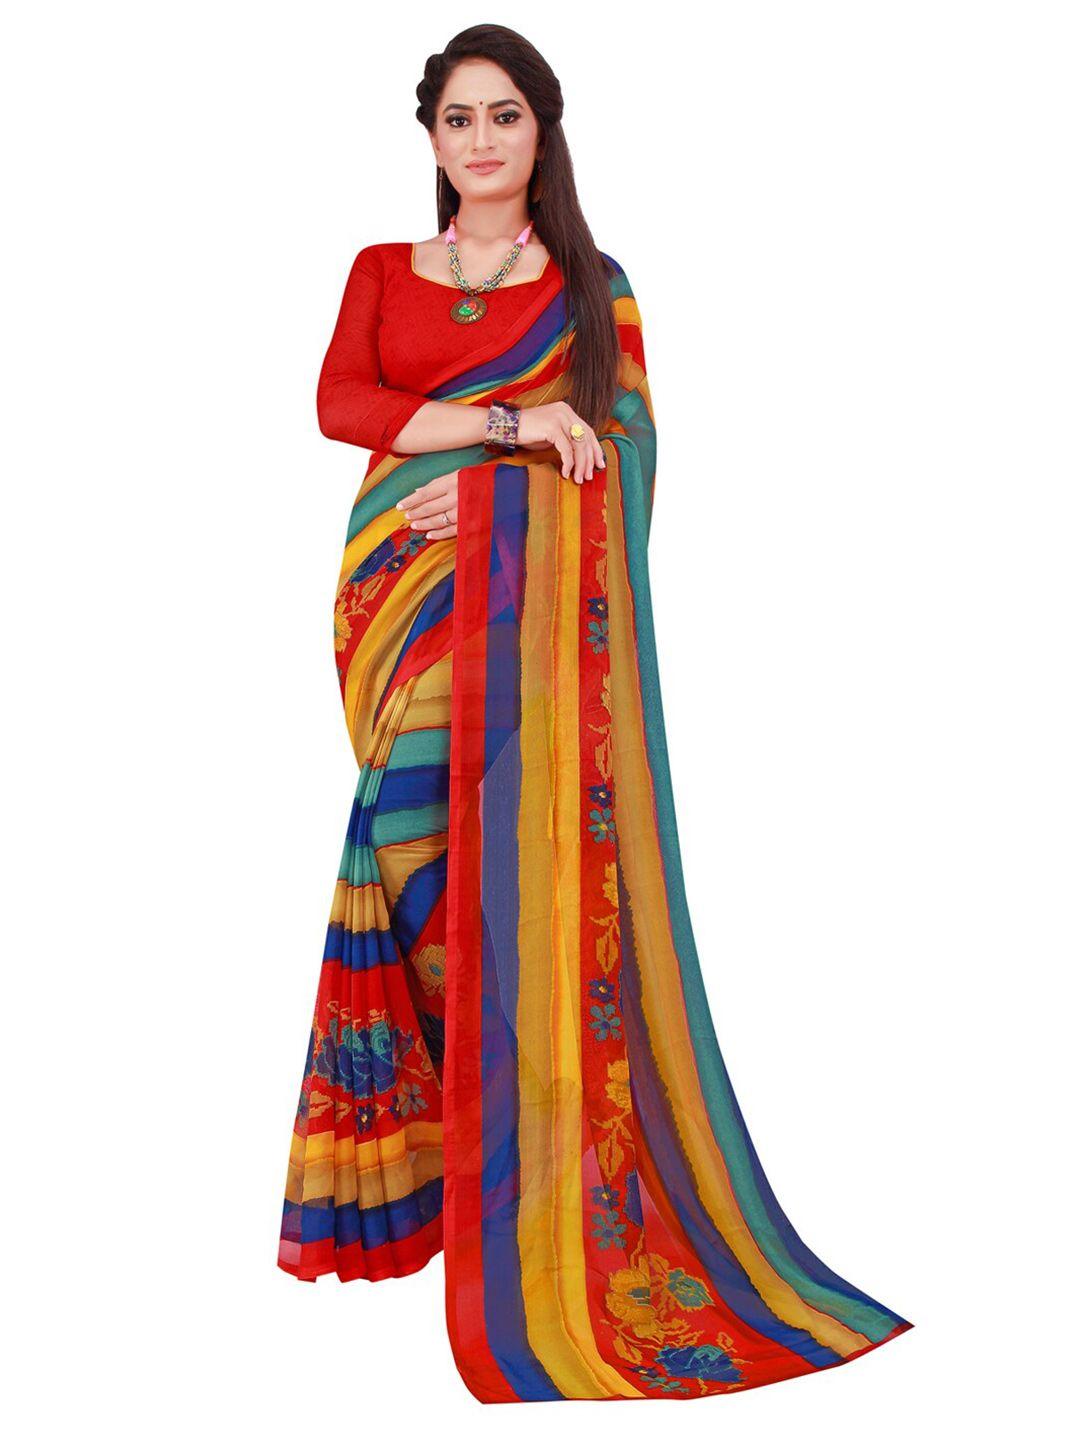 florence yellow & red floral pure georgette saree